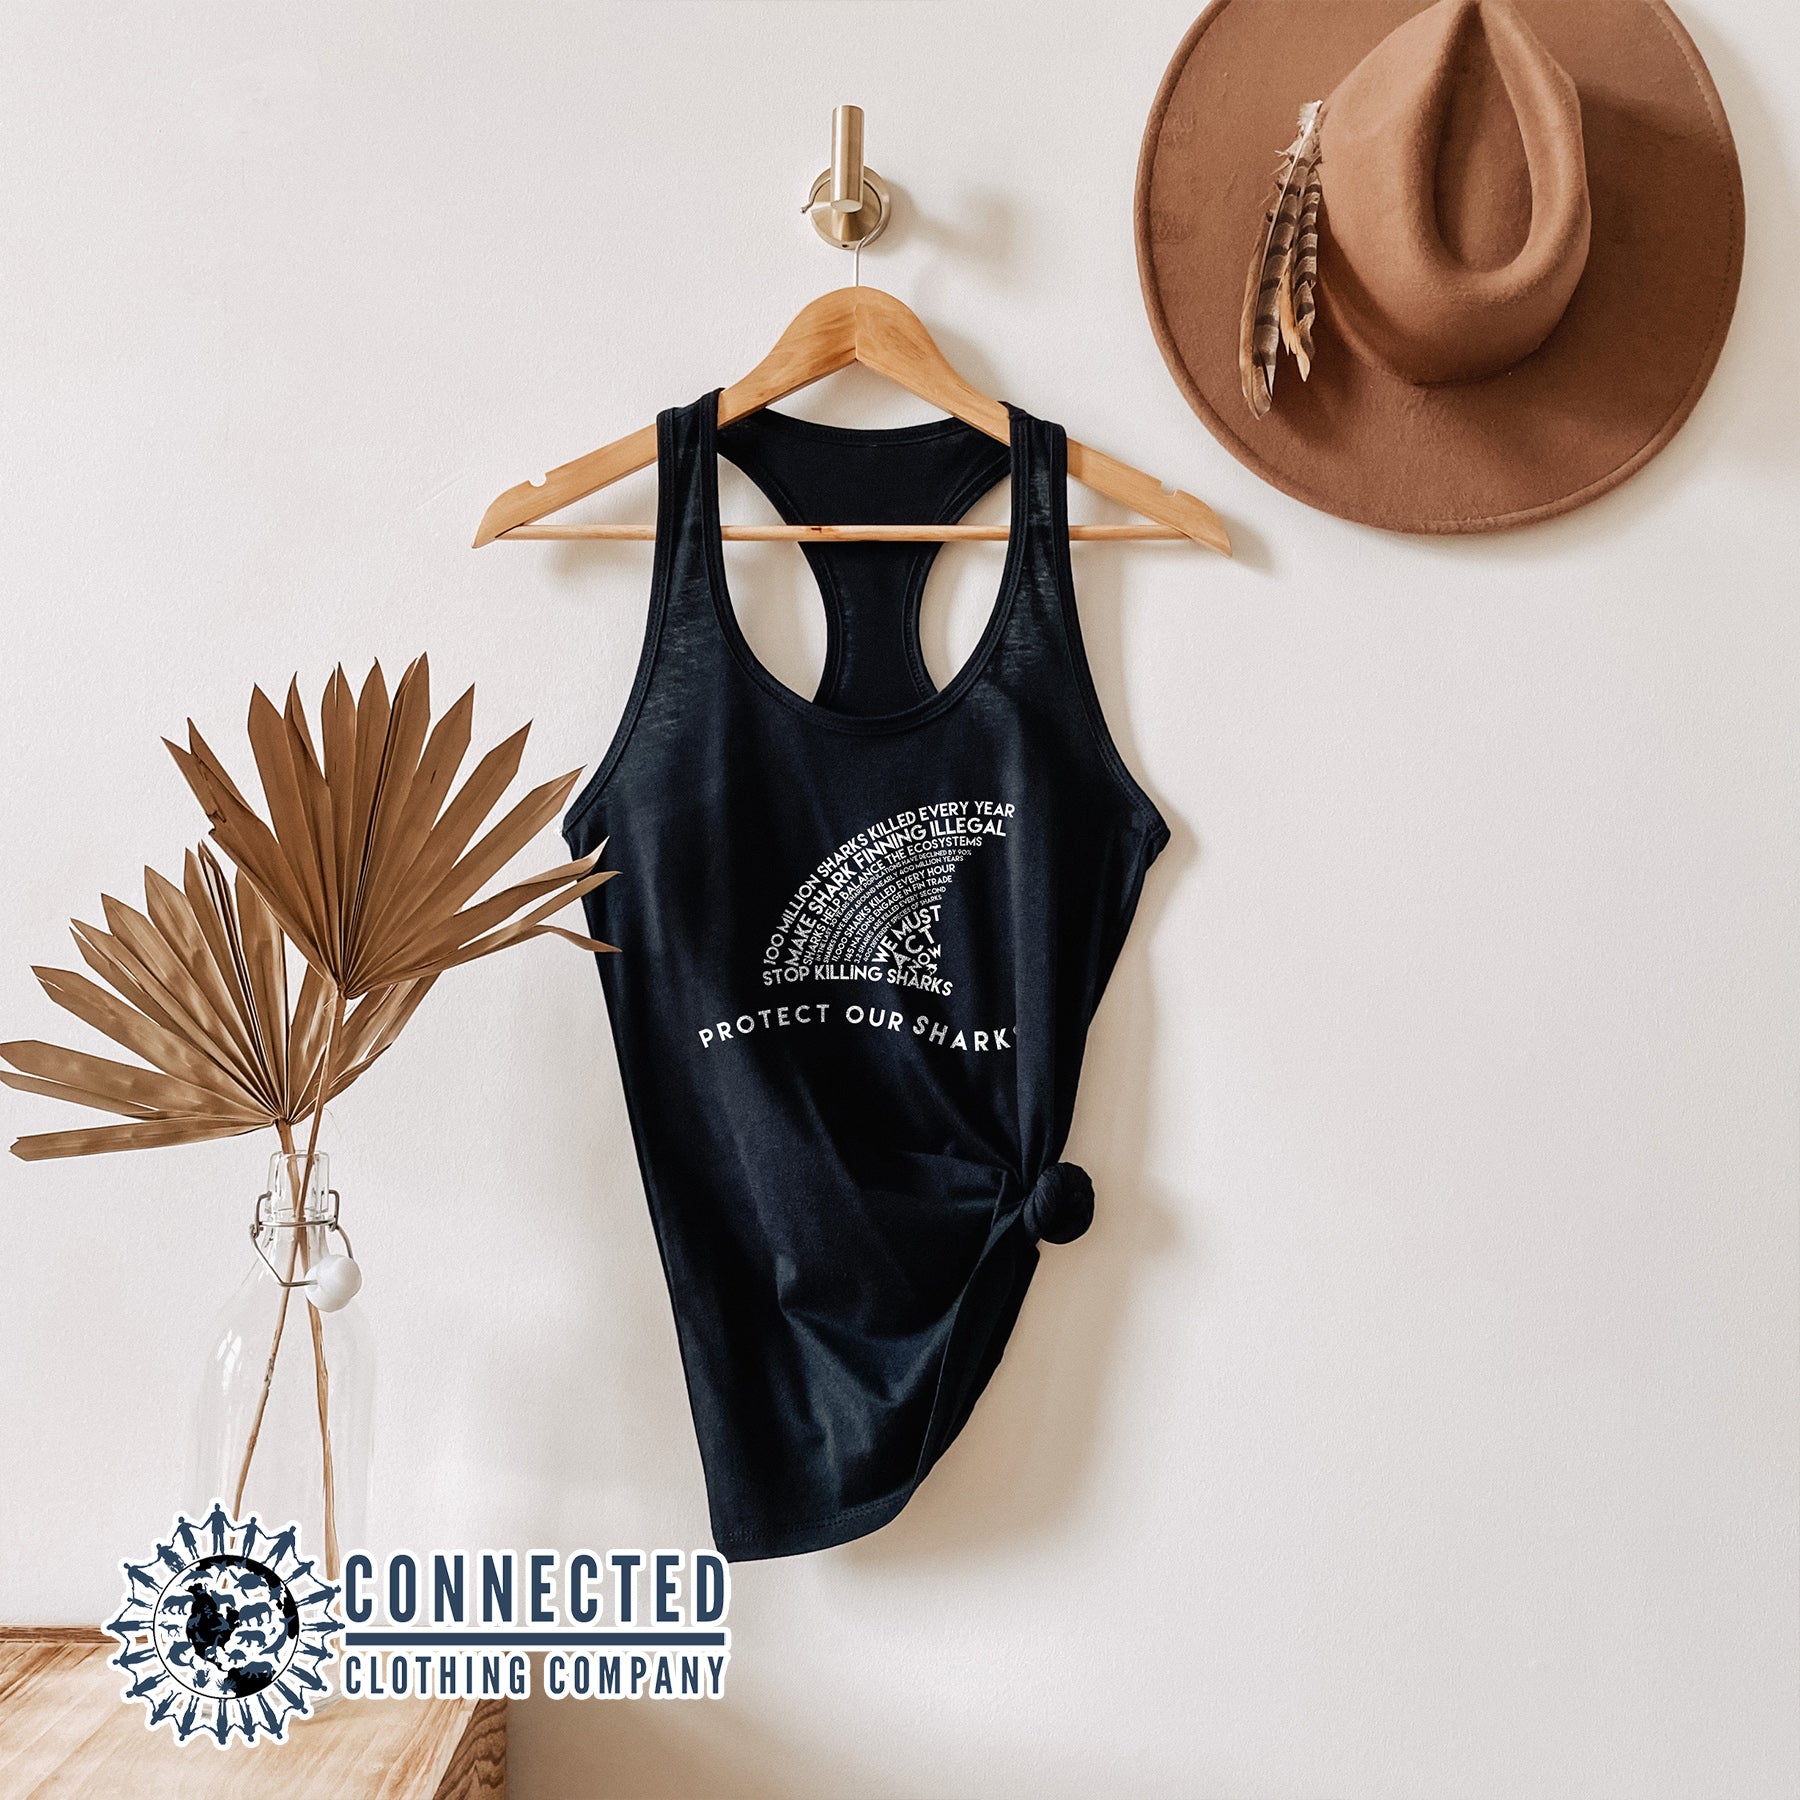 Black Protect Our Sharks Women's Tank Top - sweetsherriloudesigns - Ethically and Sustainably Made - 10% of profits donated to Oceana shark conservation